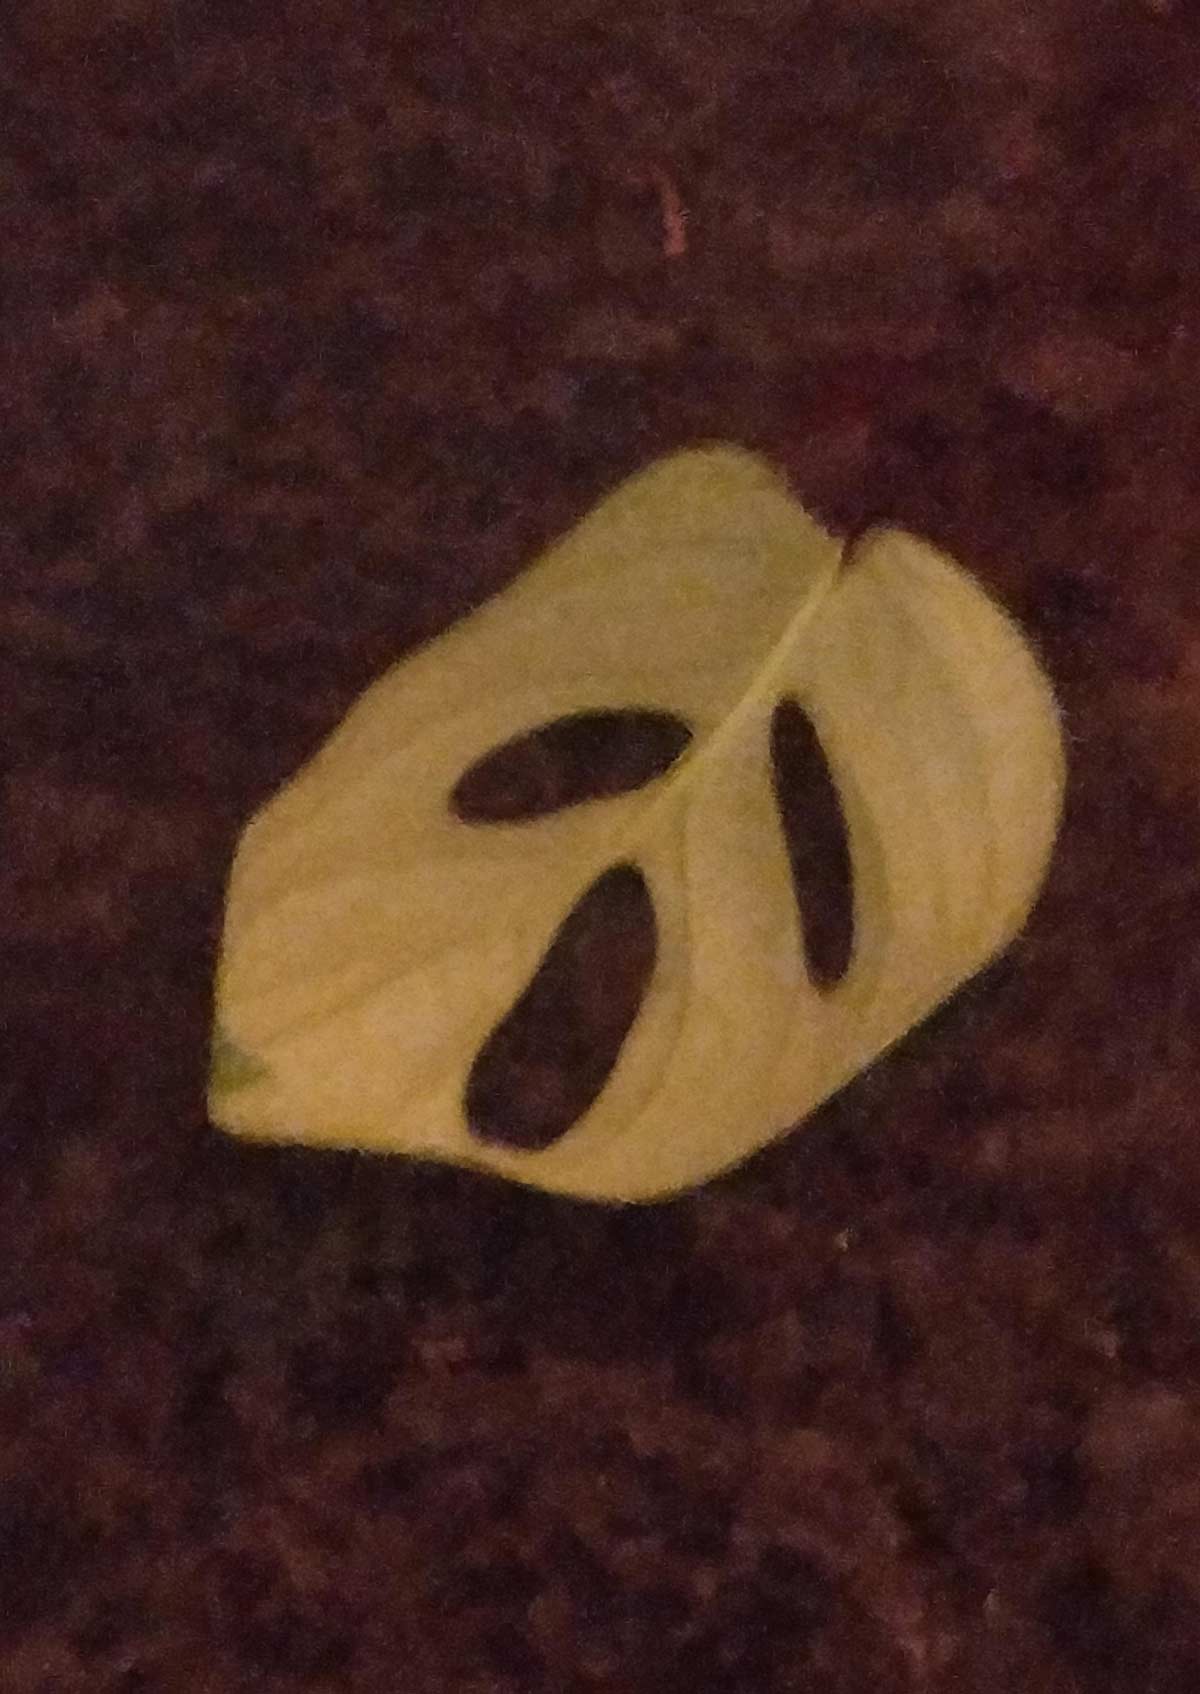 This leaf reminds me of Scary movie